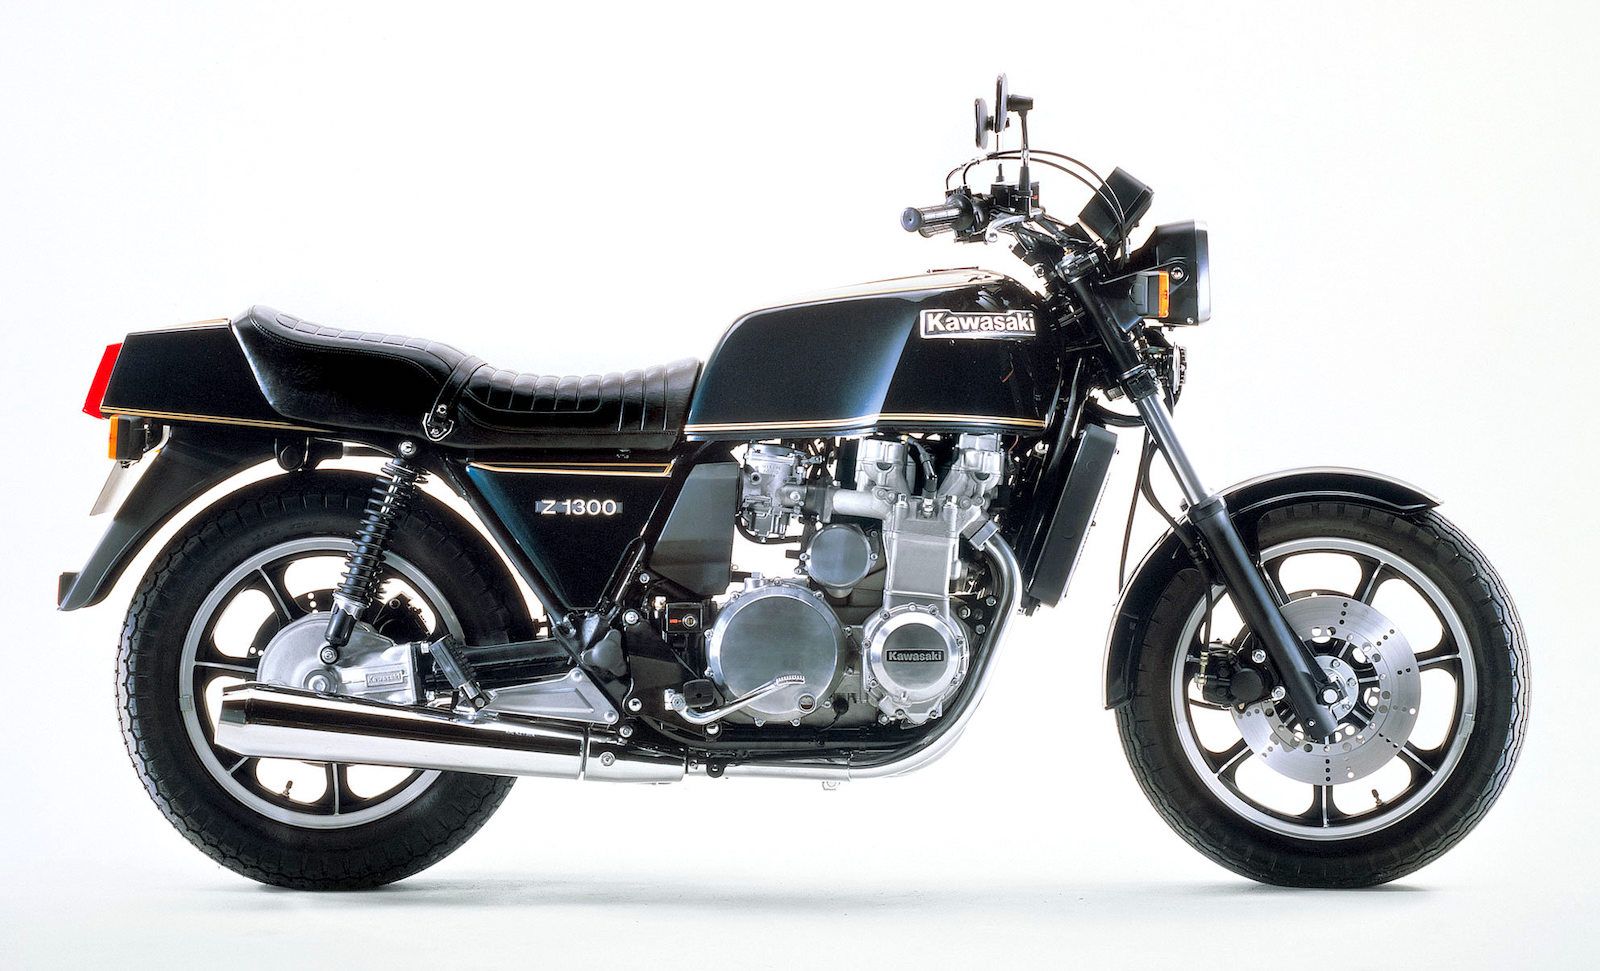 Top 10 Six Cylinder Motorcycles